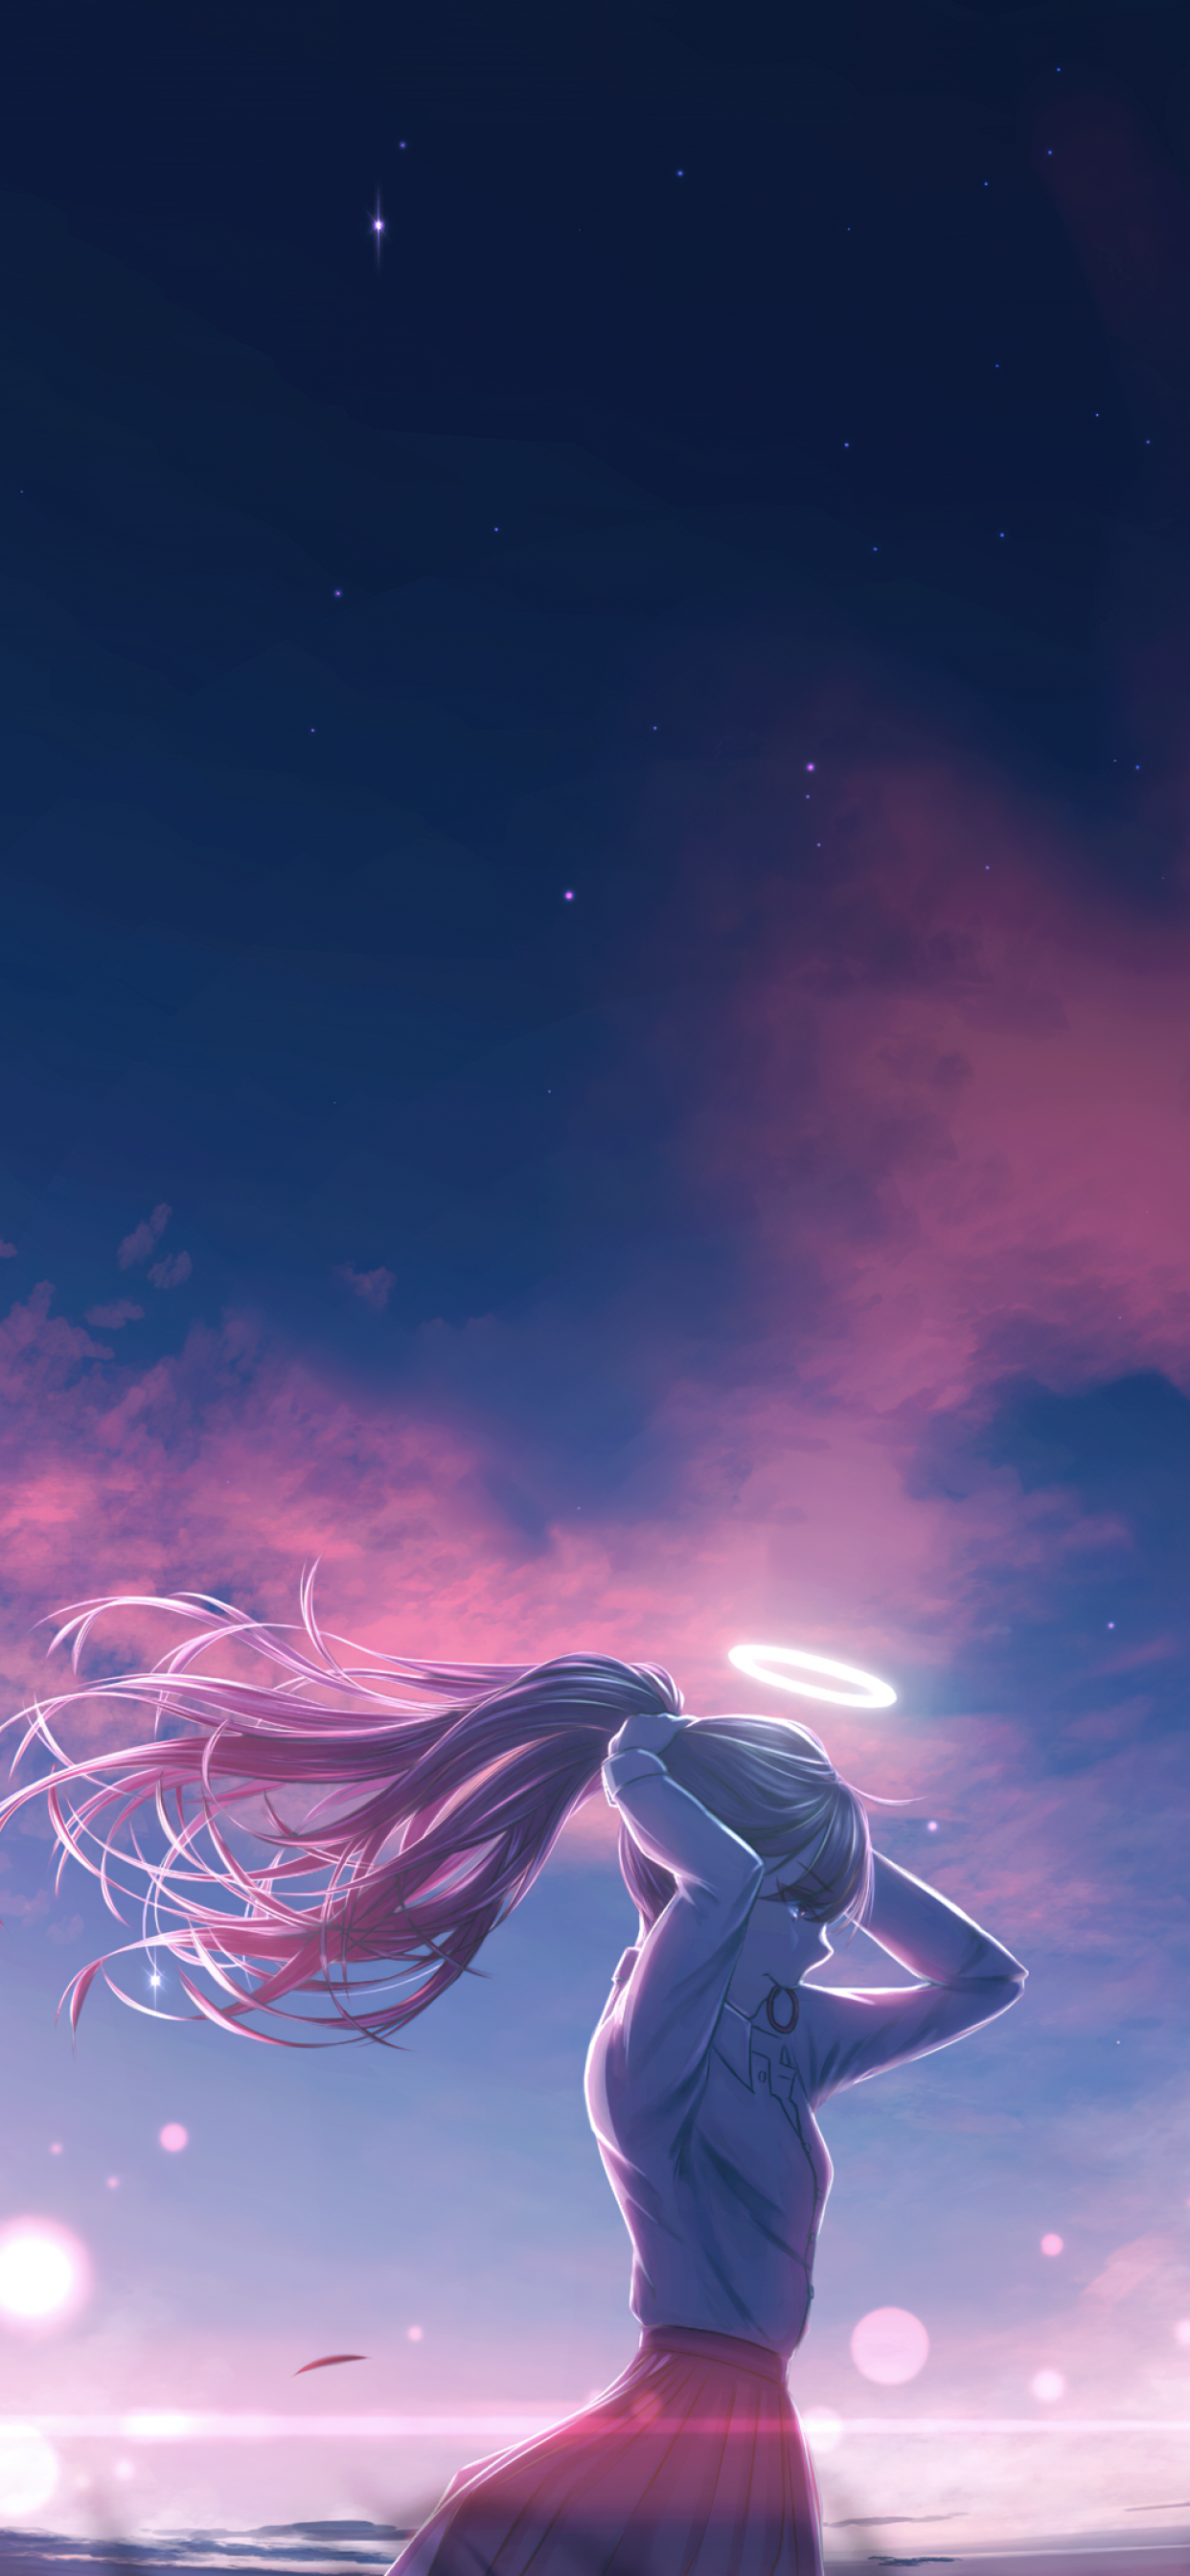 Anime Aesthetic Wallpapers and Backgrounds